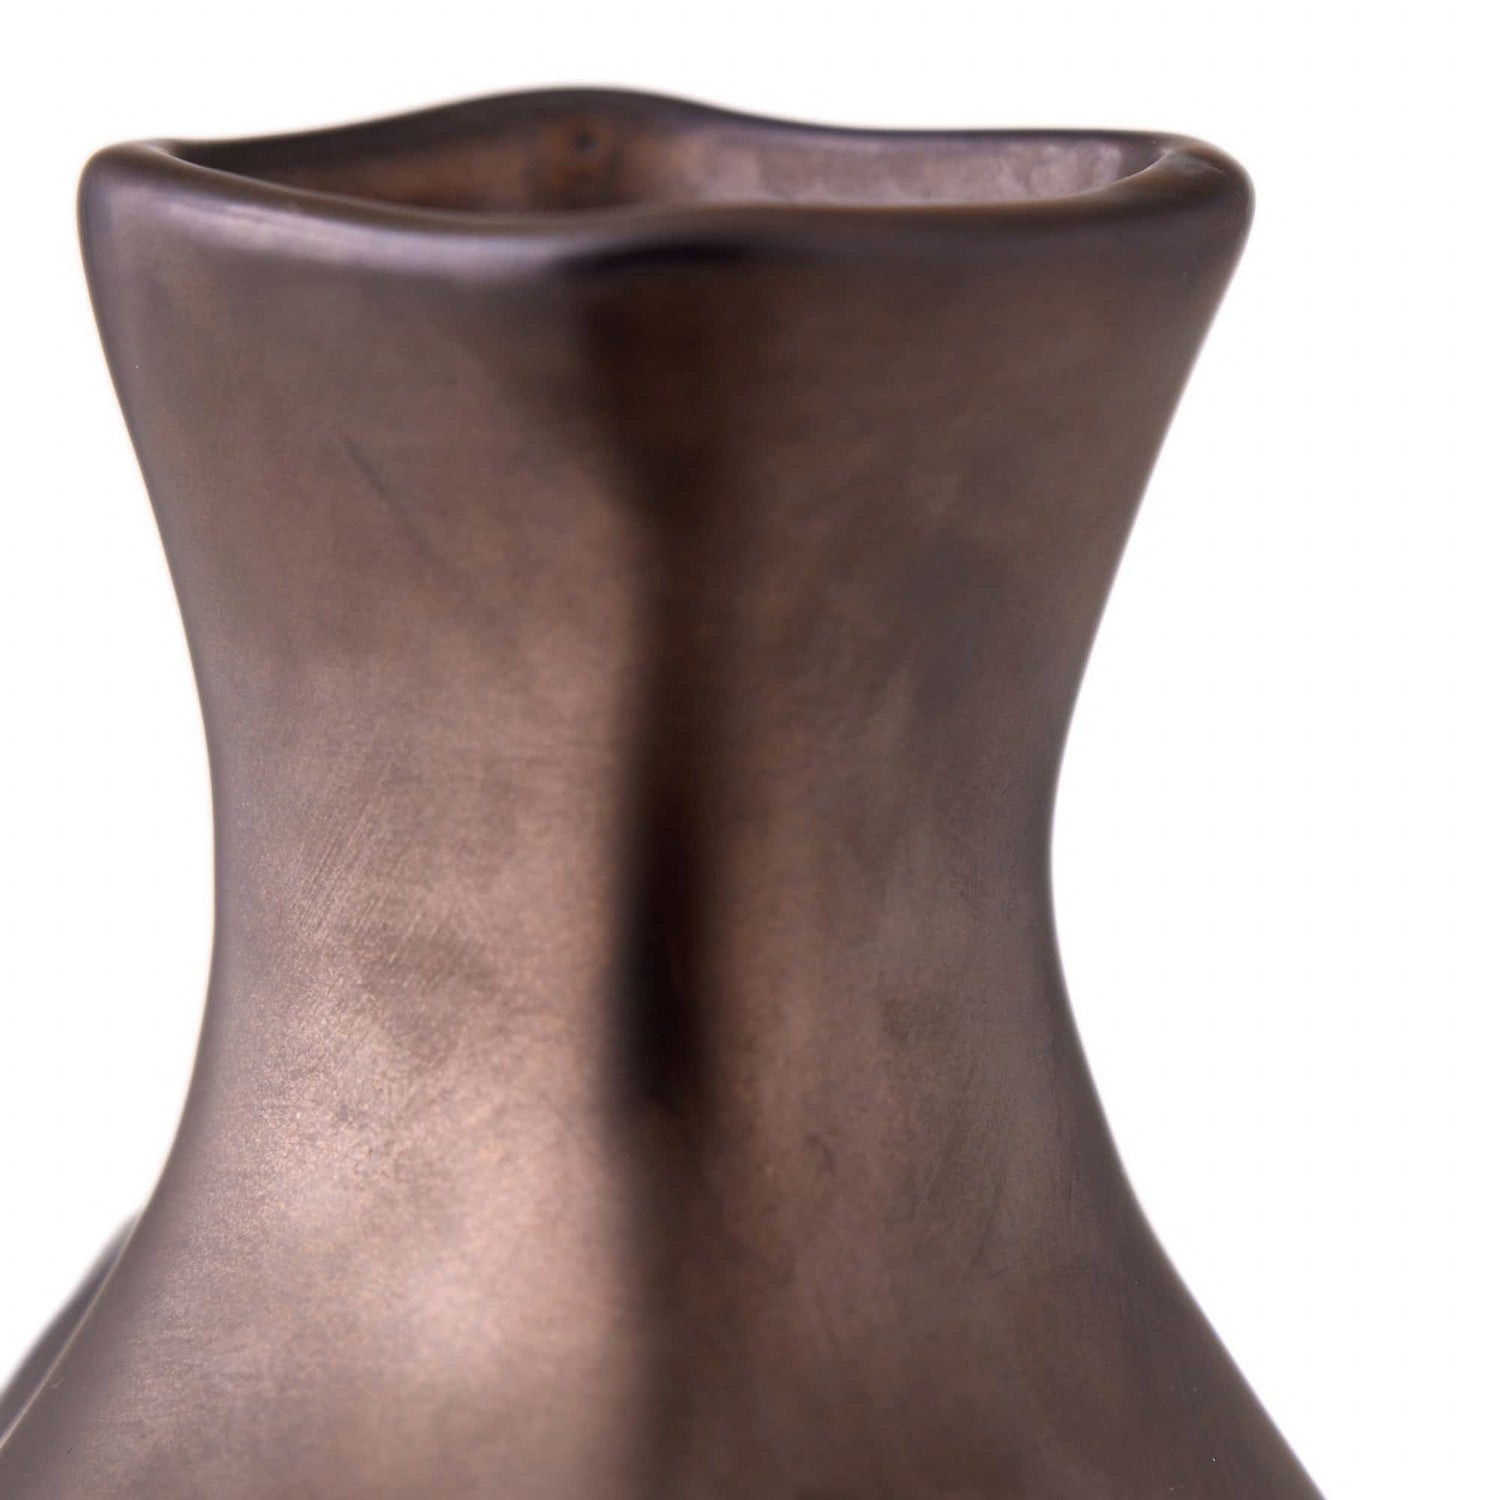 Vase from the Tilbury collection in Gunmetal finish